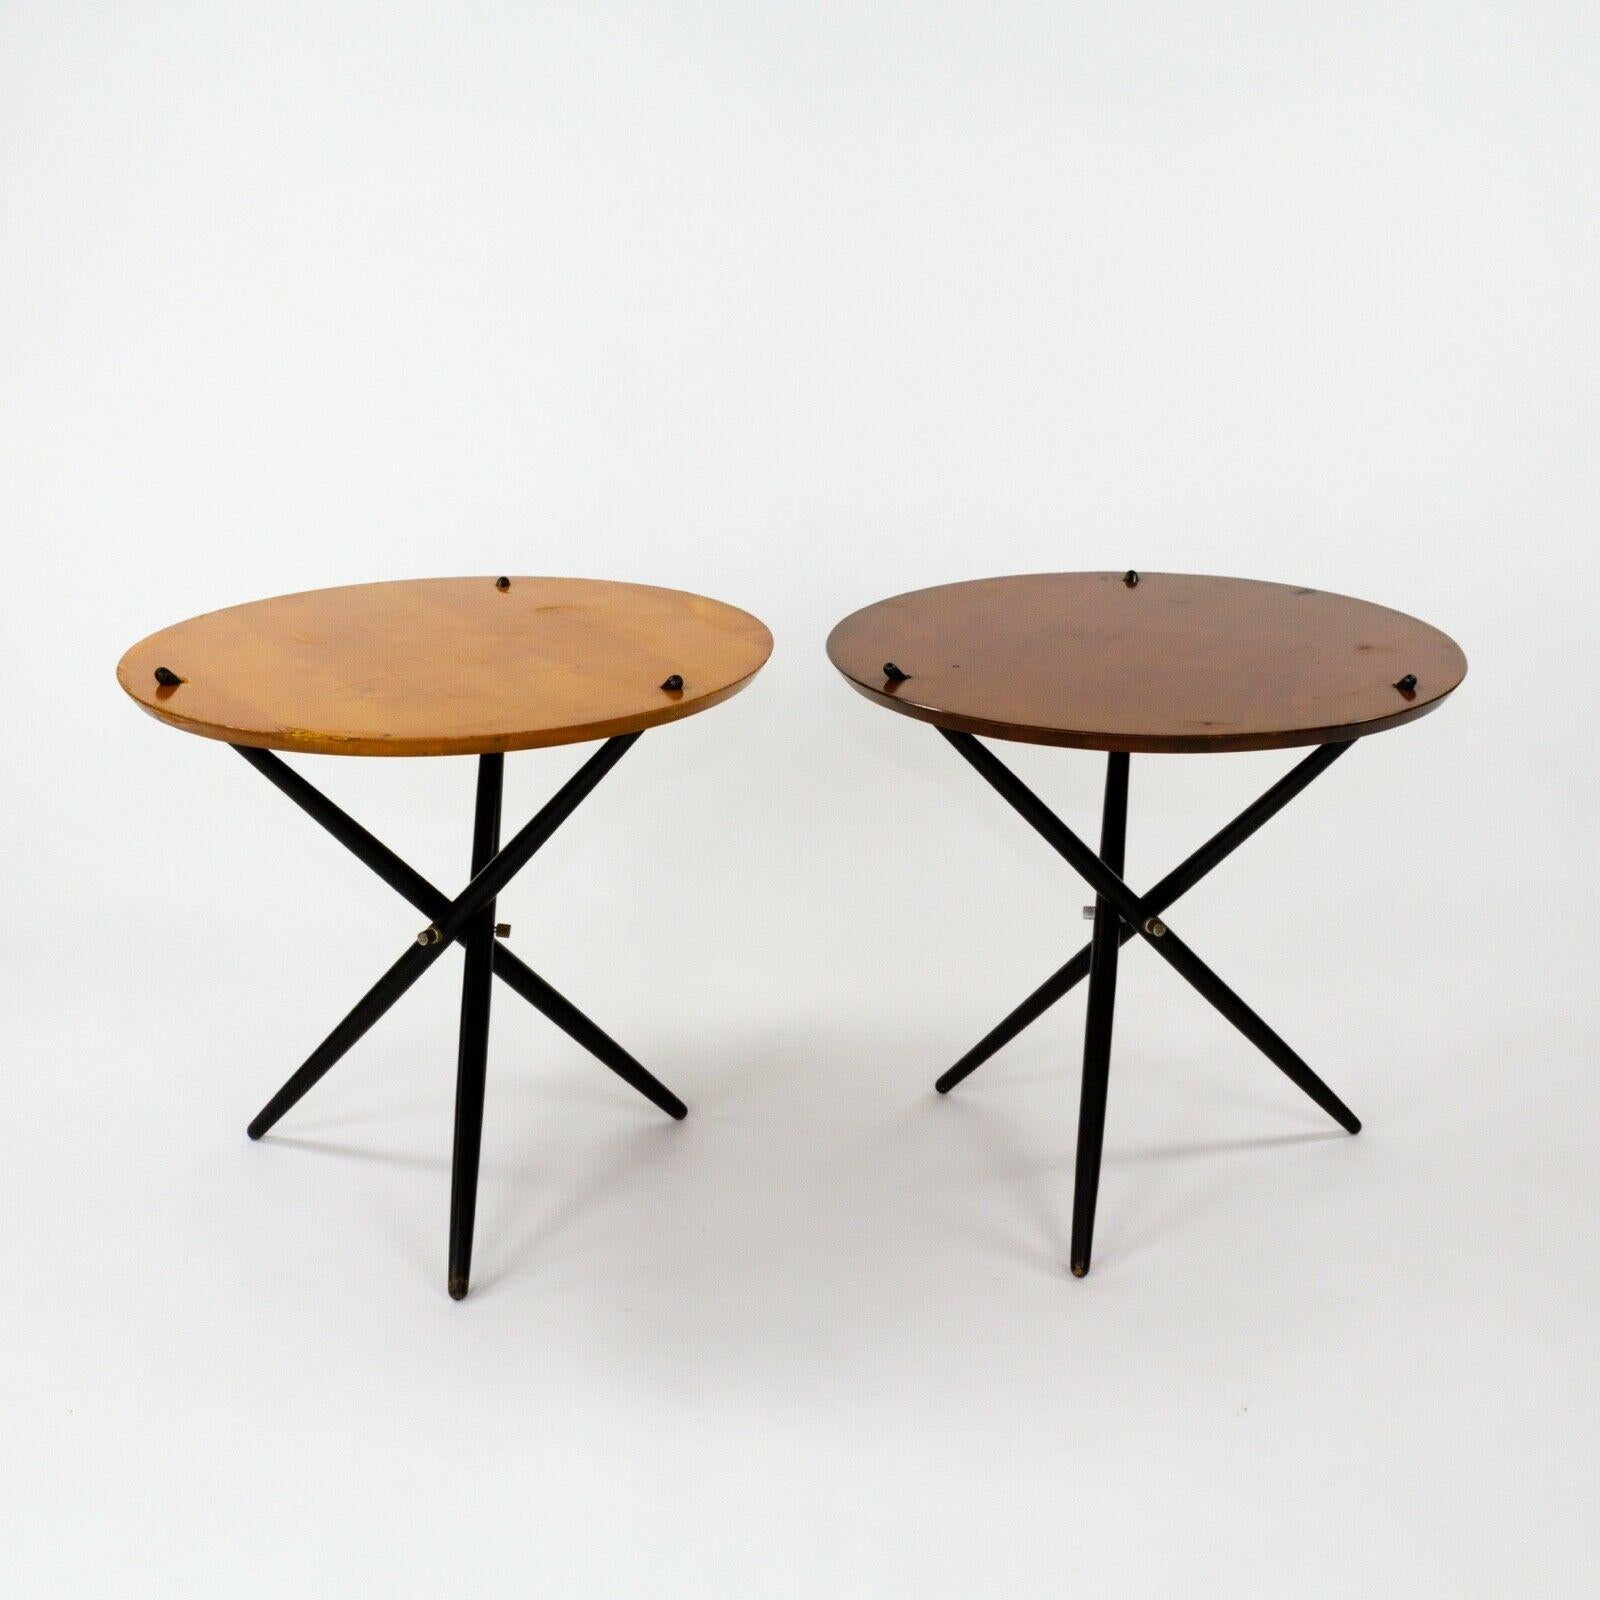 American 1951 Hans Bellman Small Tripod Table for Knoll Associates No. 103 with 24 in Top